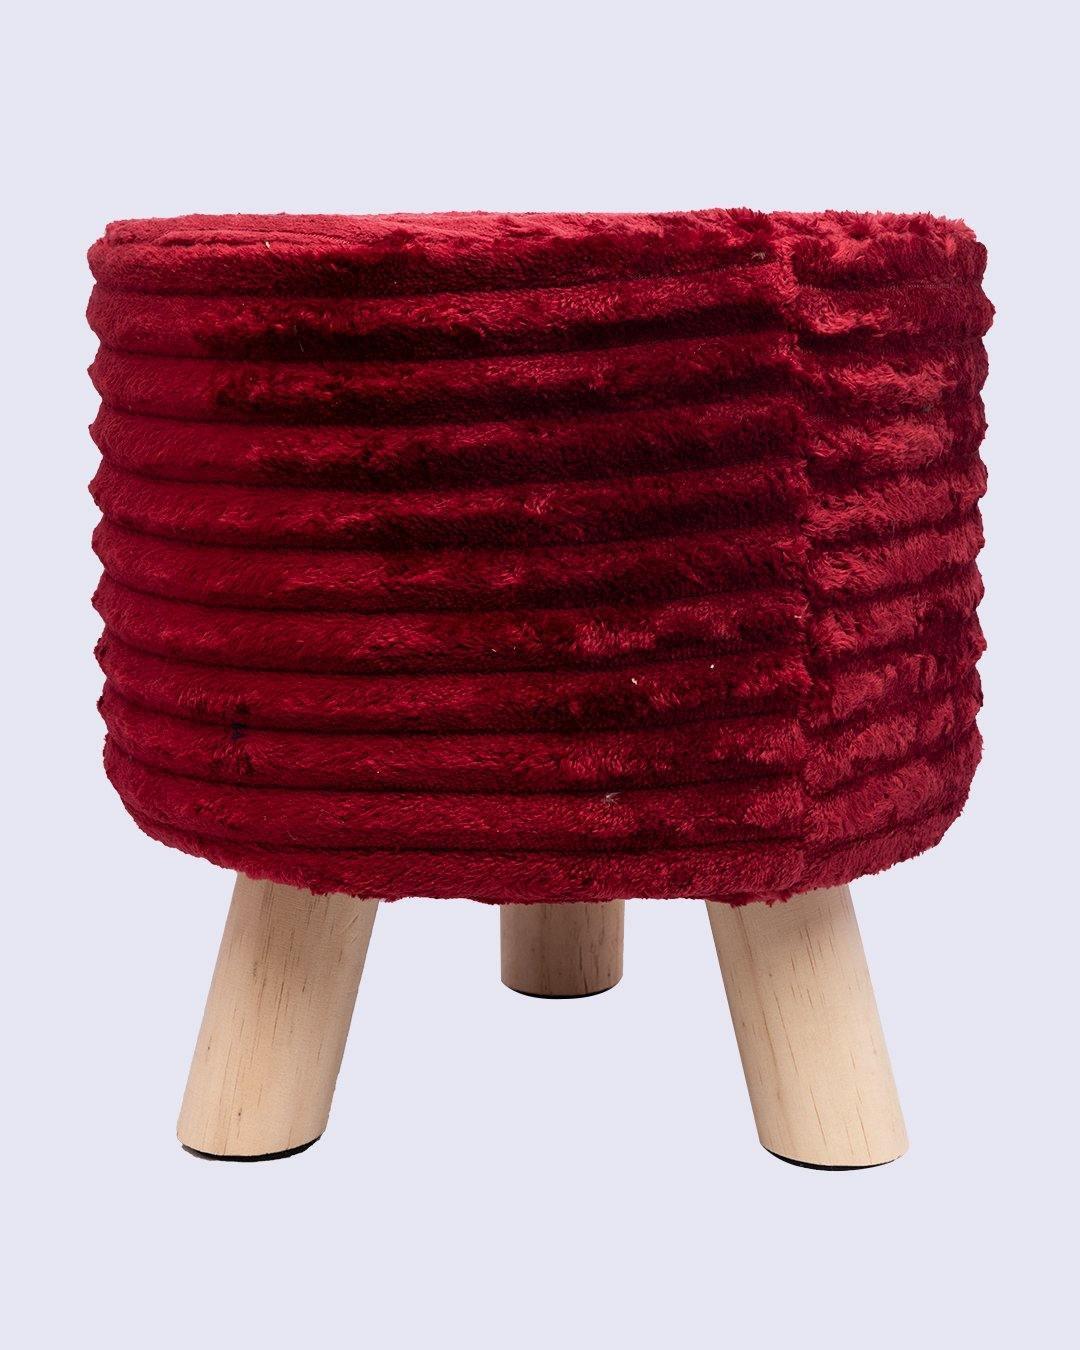 Tri Stool, Foot Stool with 3 Legs, Ottoman, Red, Wood - MARKET 99